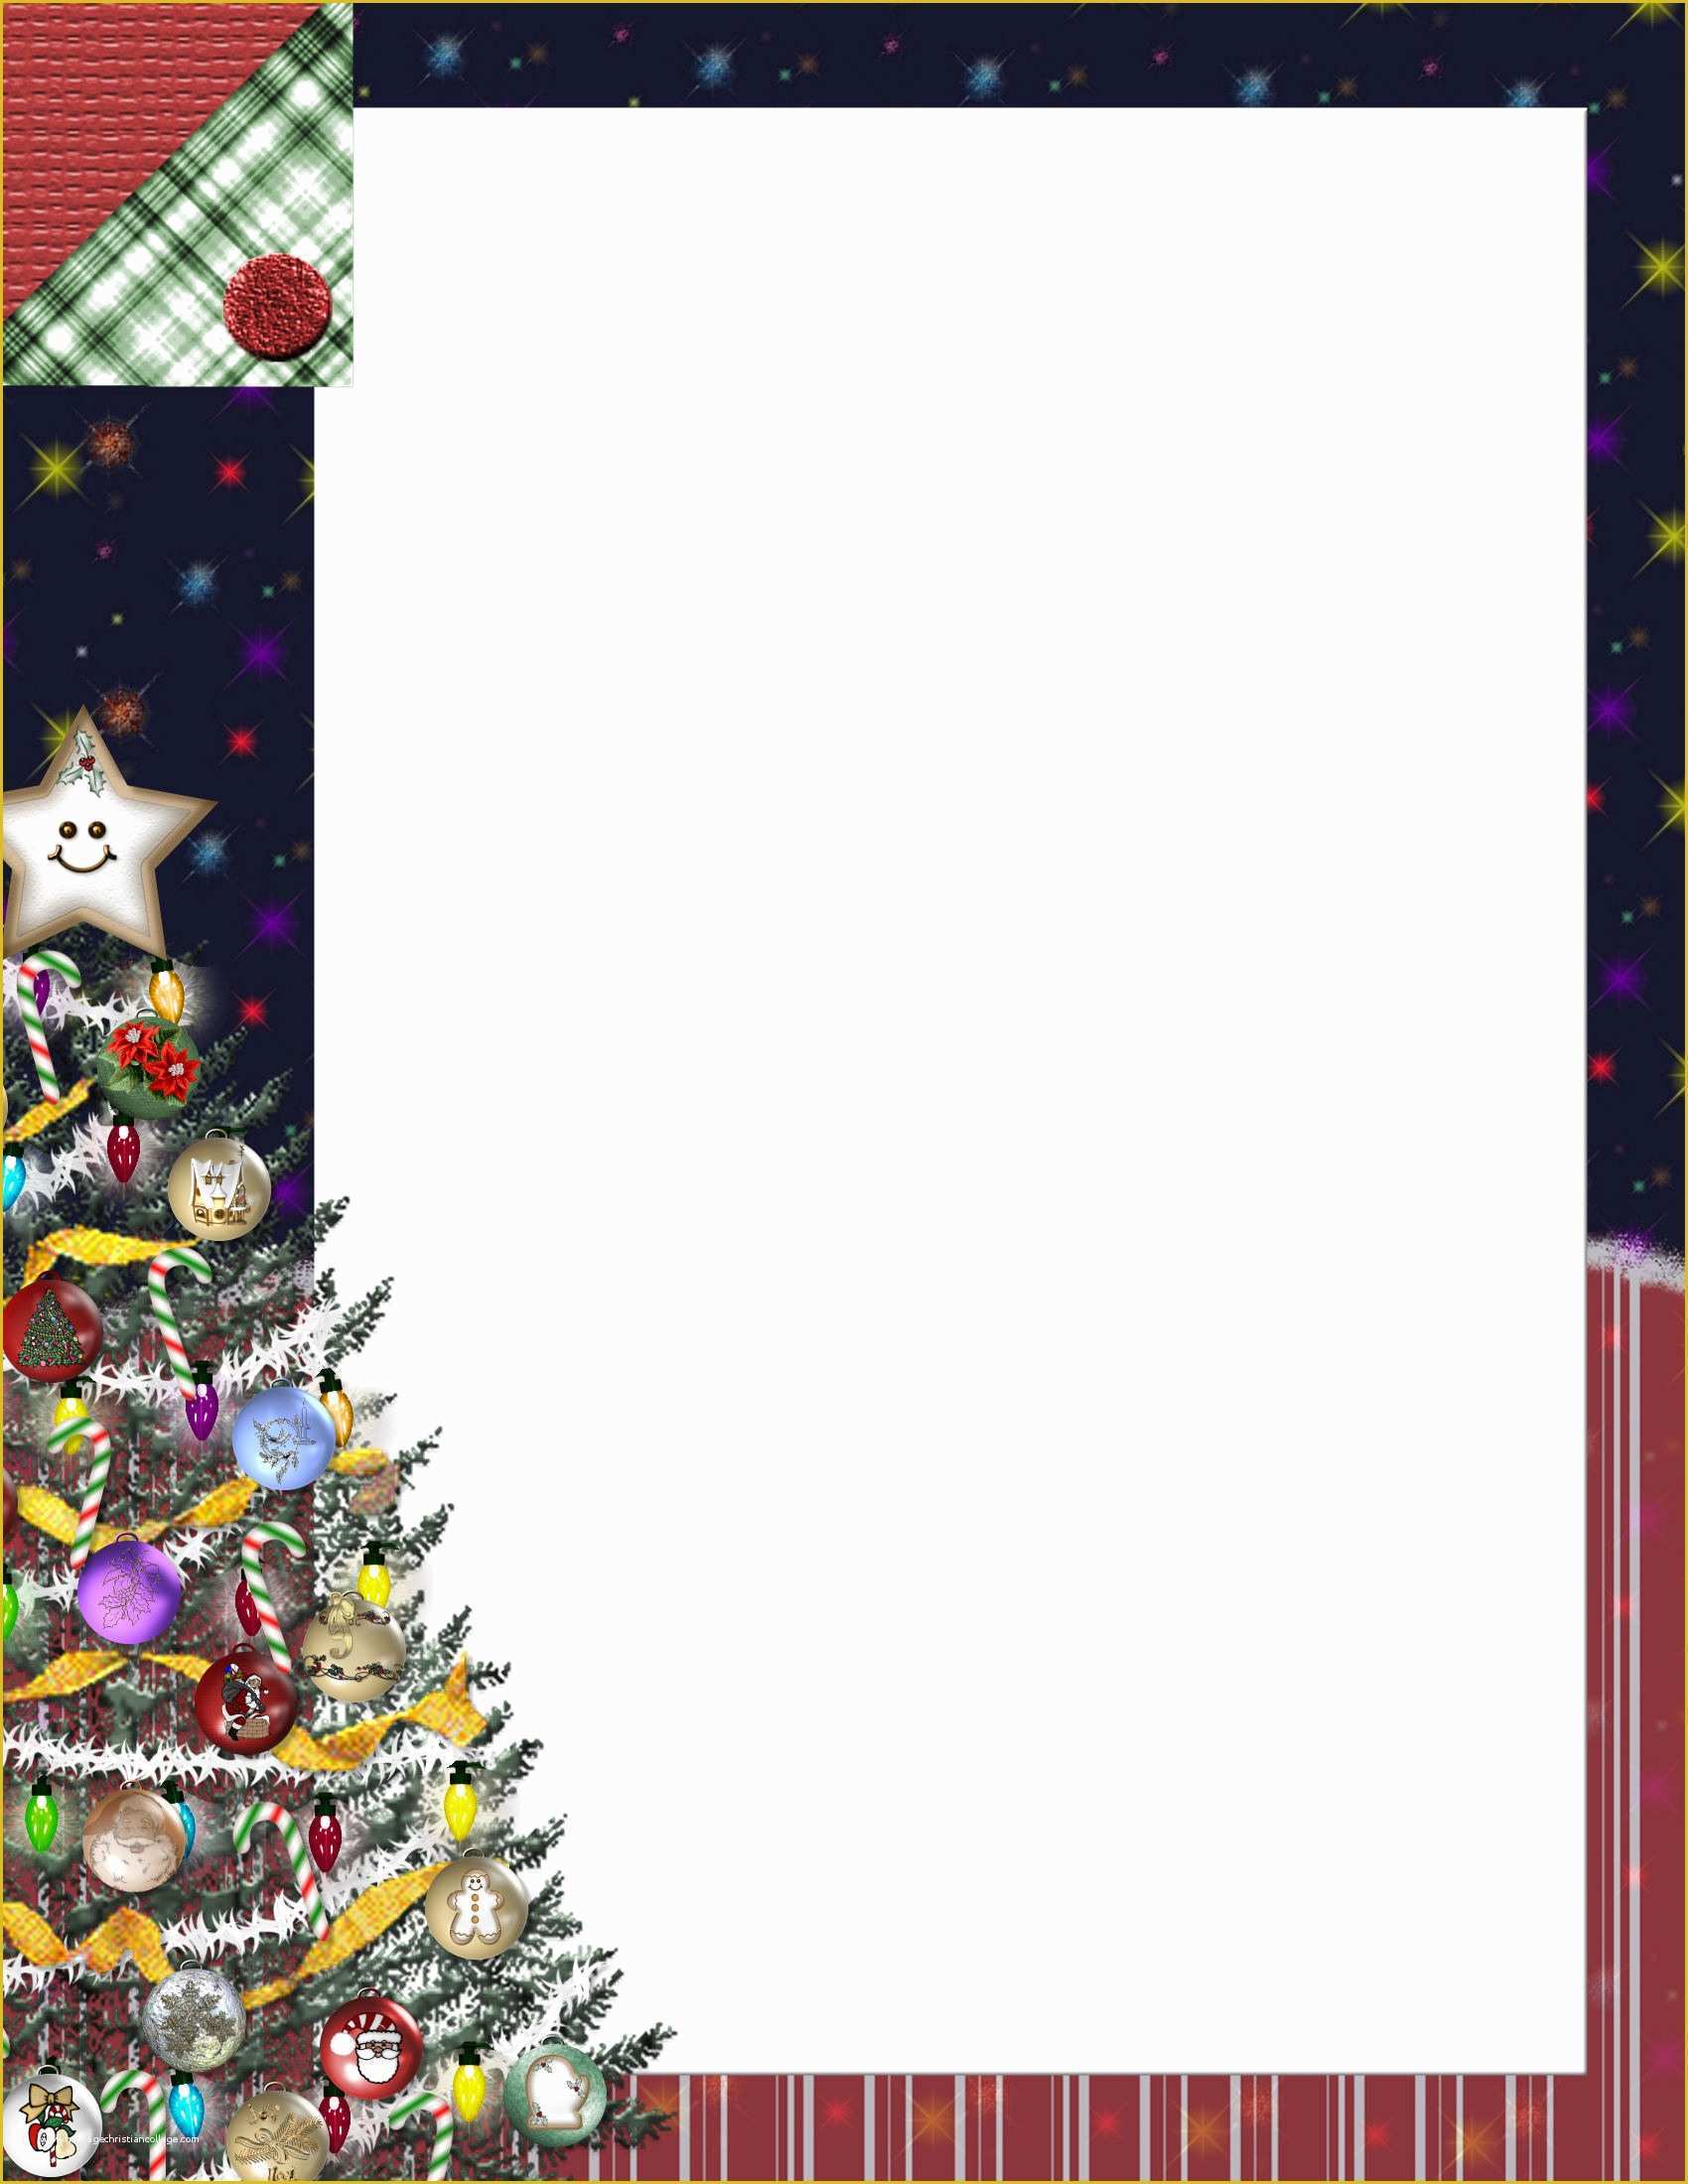 Free Christmas Templates for Word Of Christmas Template for Word Portablegasgrillweber